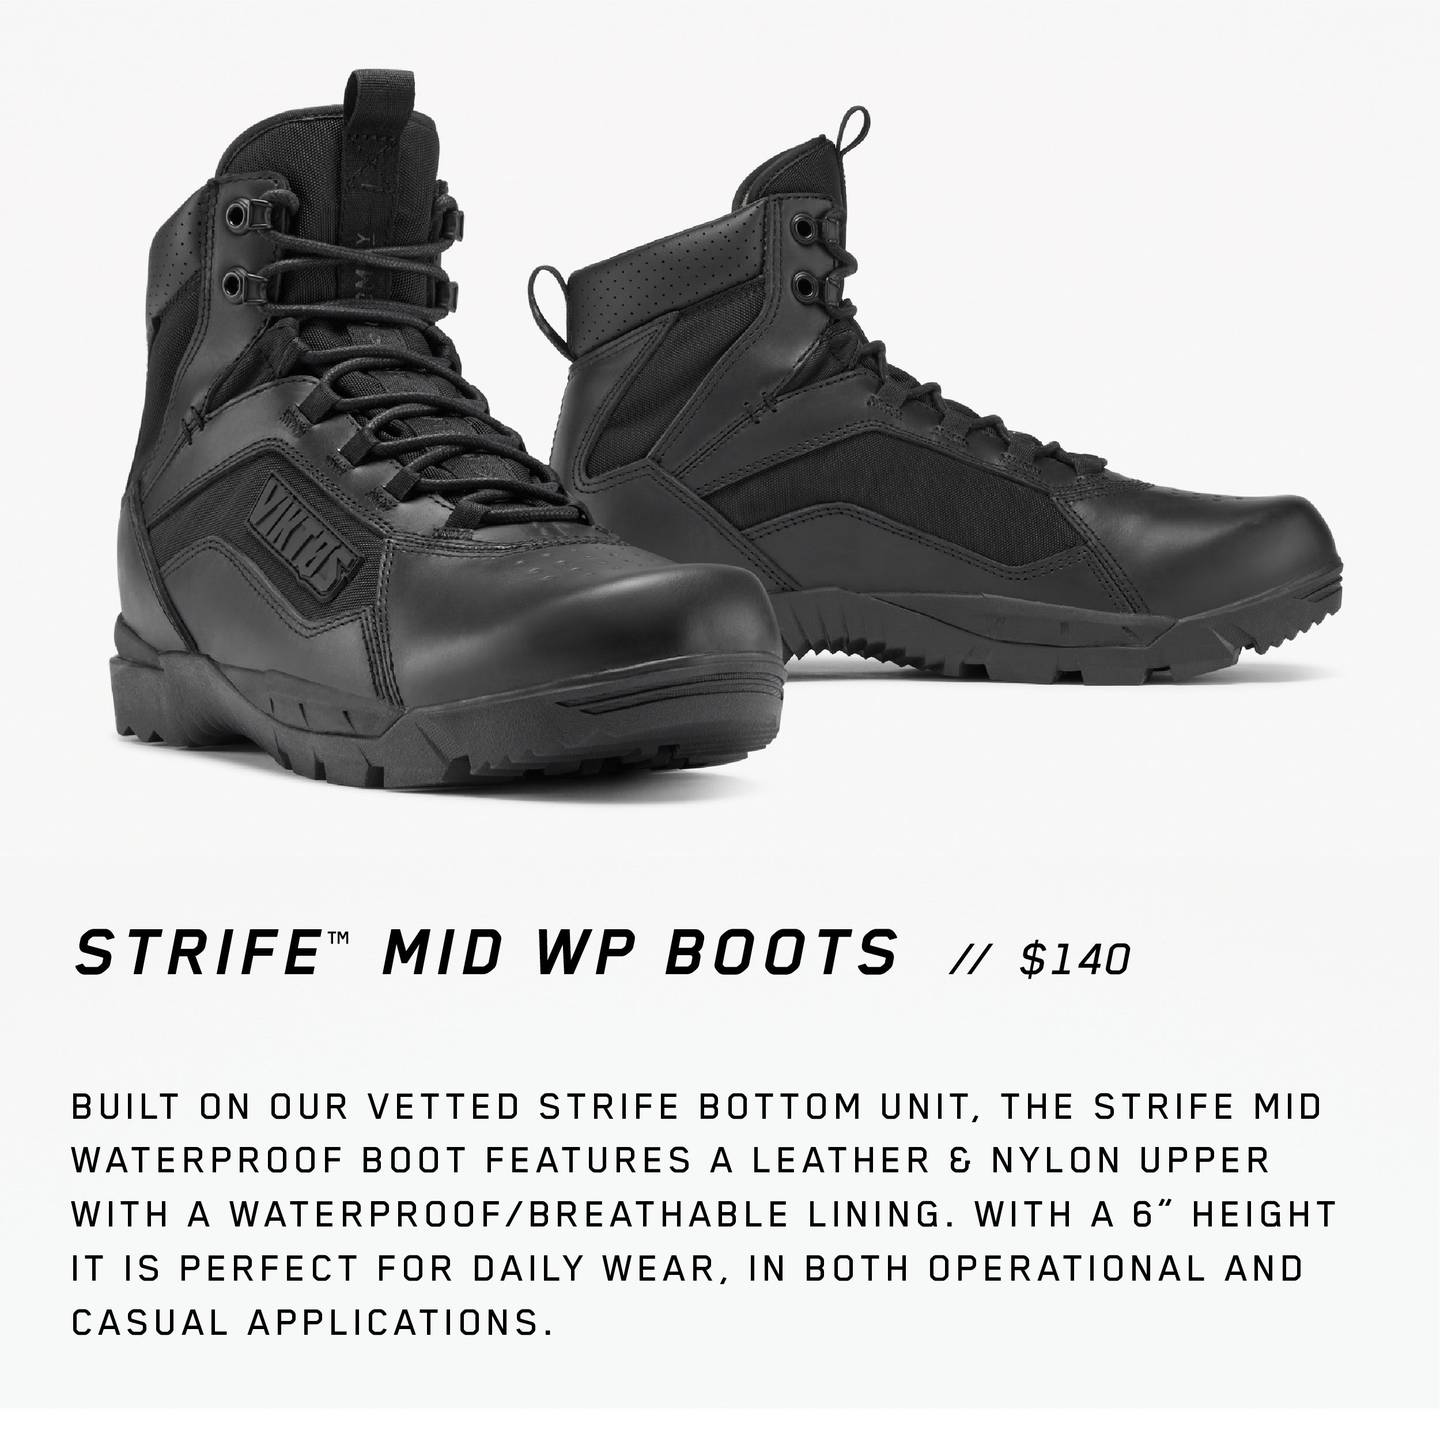 Viktos adds these kicks to its waterproof boot collection